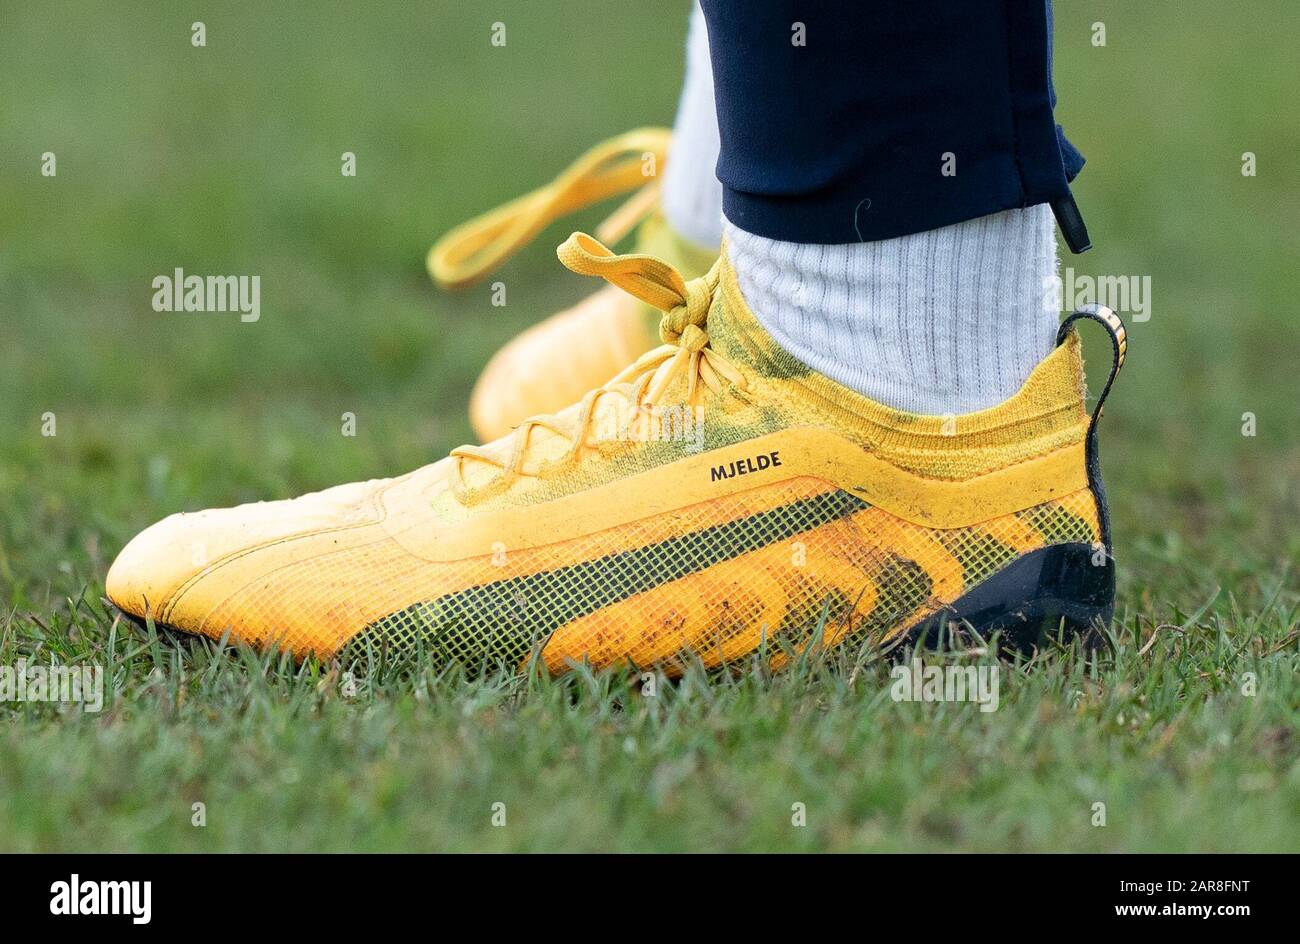 The Puma football boots of Maren Mjelde of Chelsea Women during the Women's  FA Cup 4th round match between Charlton Athletic Women and Chelsea Women at  The Oakwood, Old Road, Crayford on